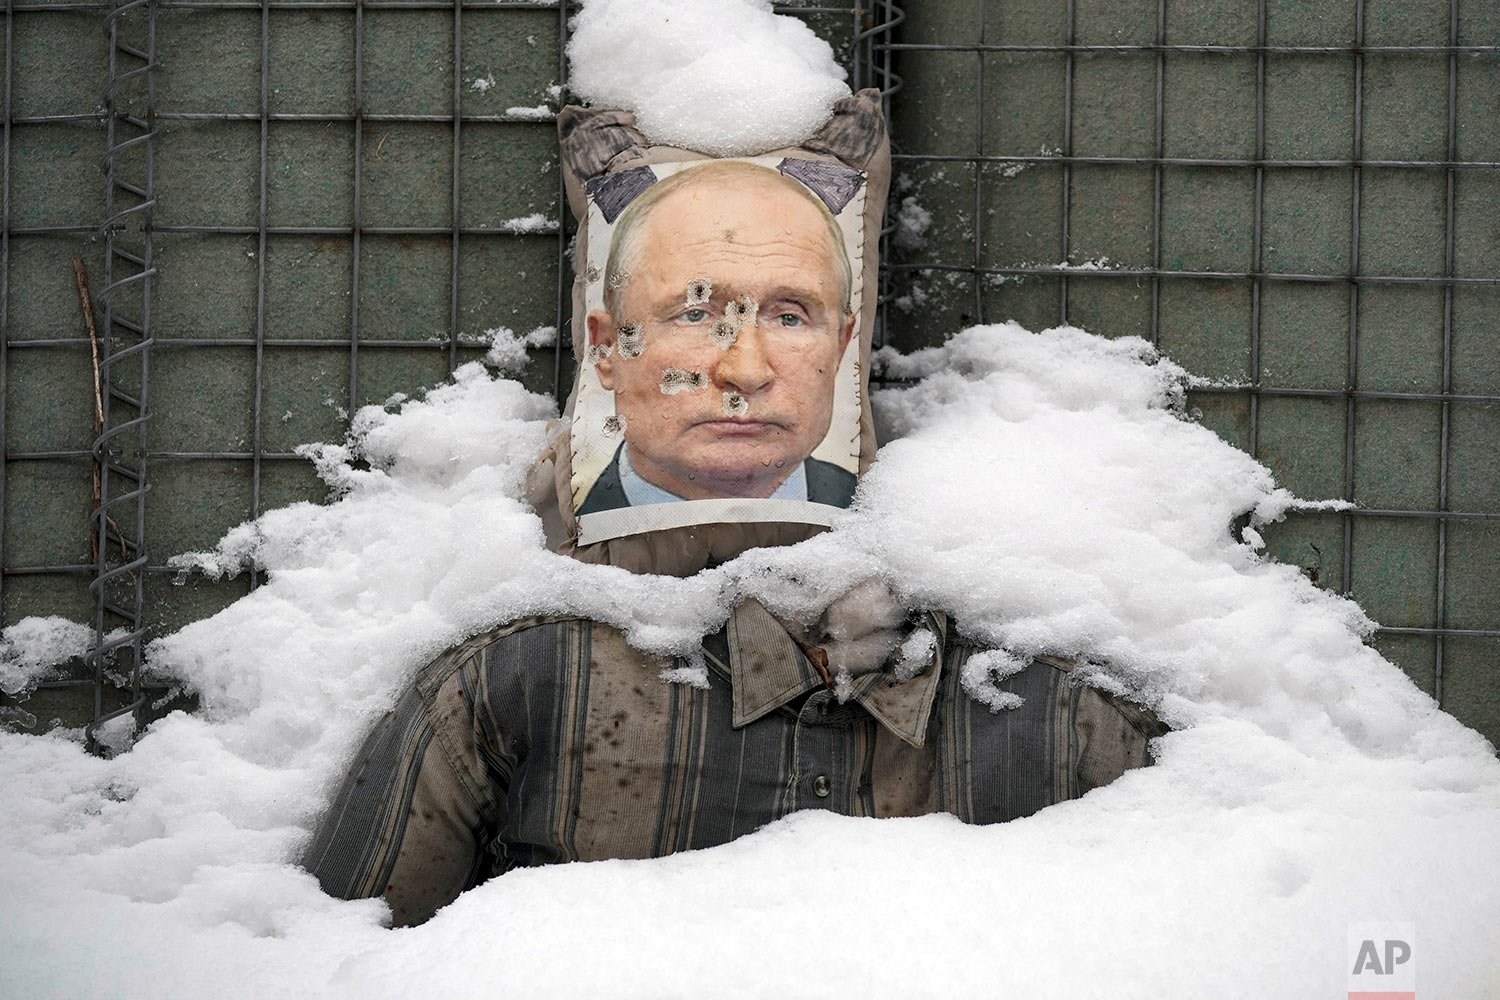  A bullet riddled effigy of Russian President Vladimir Putin, is coated by fresh snow at a frontline position in the Luhansk region, eastern Ukraine, Tuesday, Feb. 1, 2022. (AP Photo/Vadim Ghirda) 